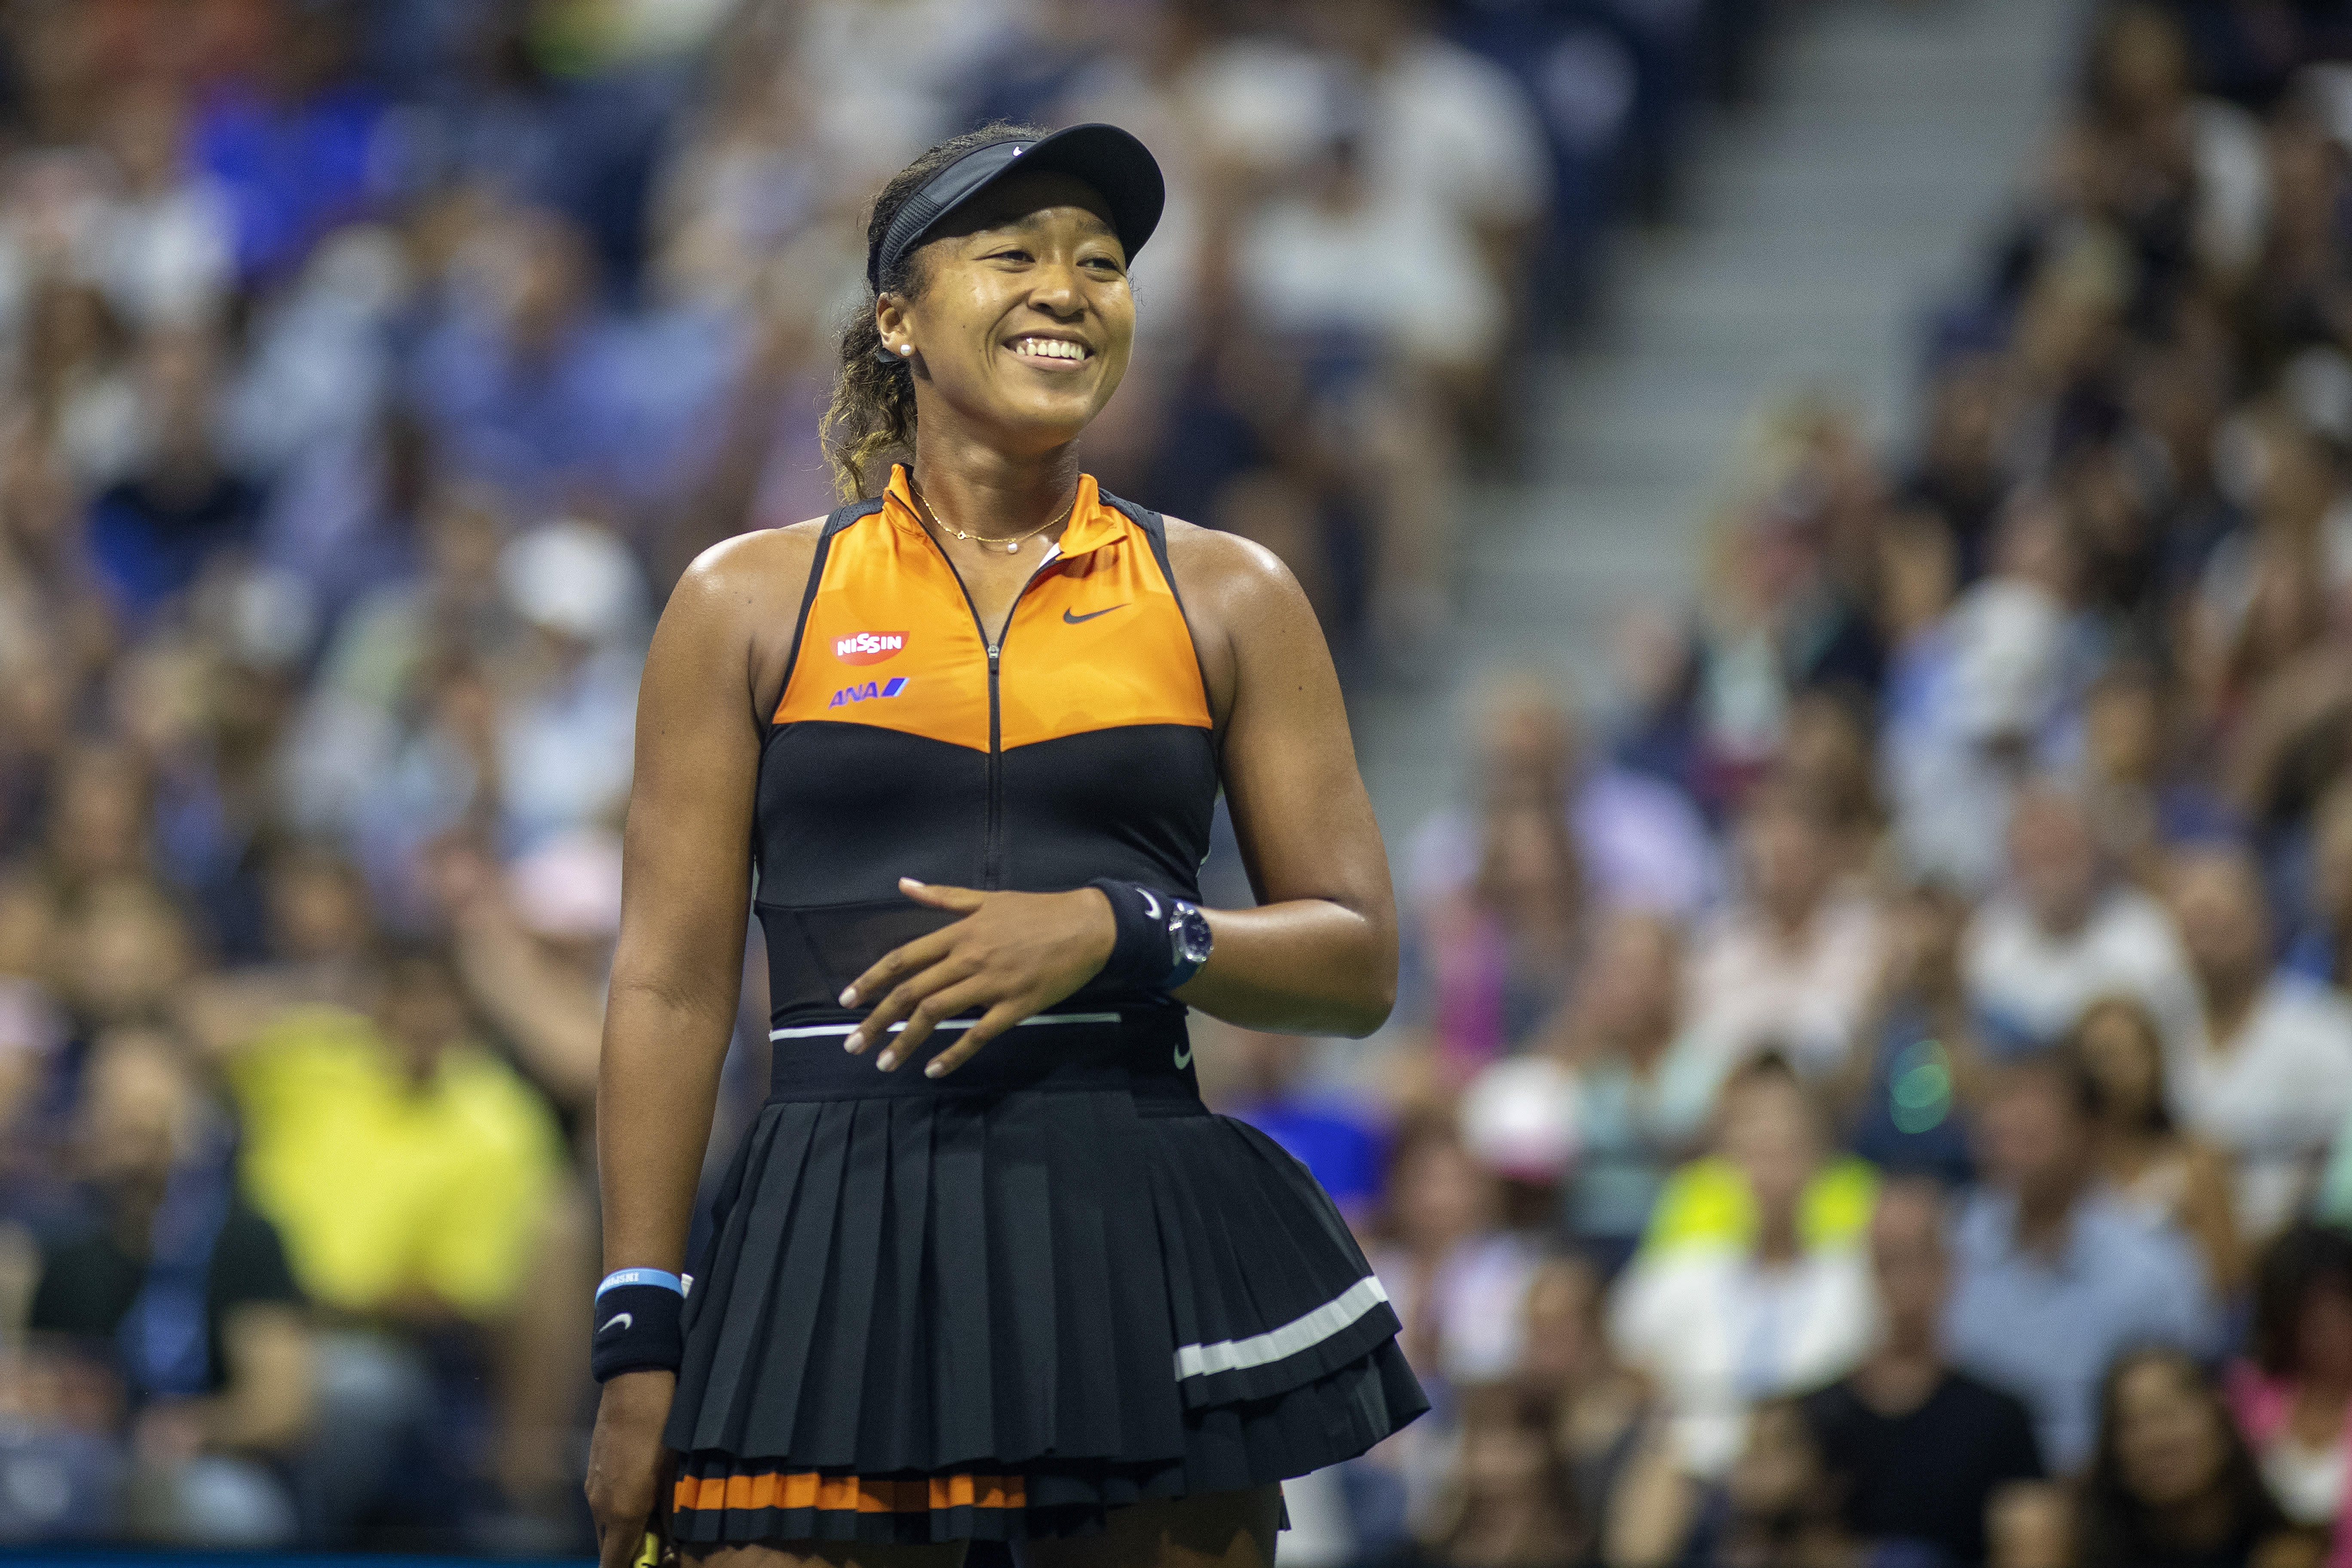 From Serena to Sharapova, Naomi Osaka revisits some of tennis' most iconic on-court looks | Tennis.com